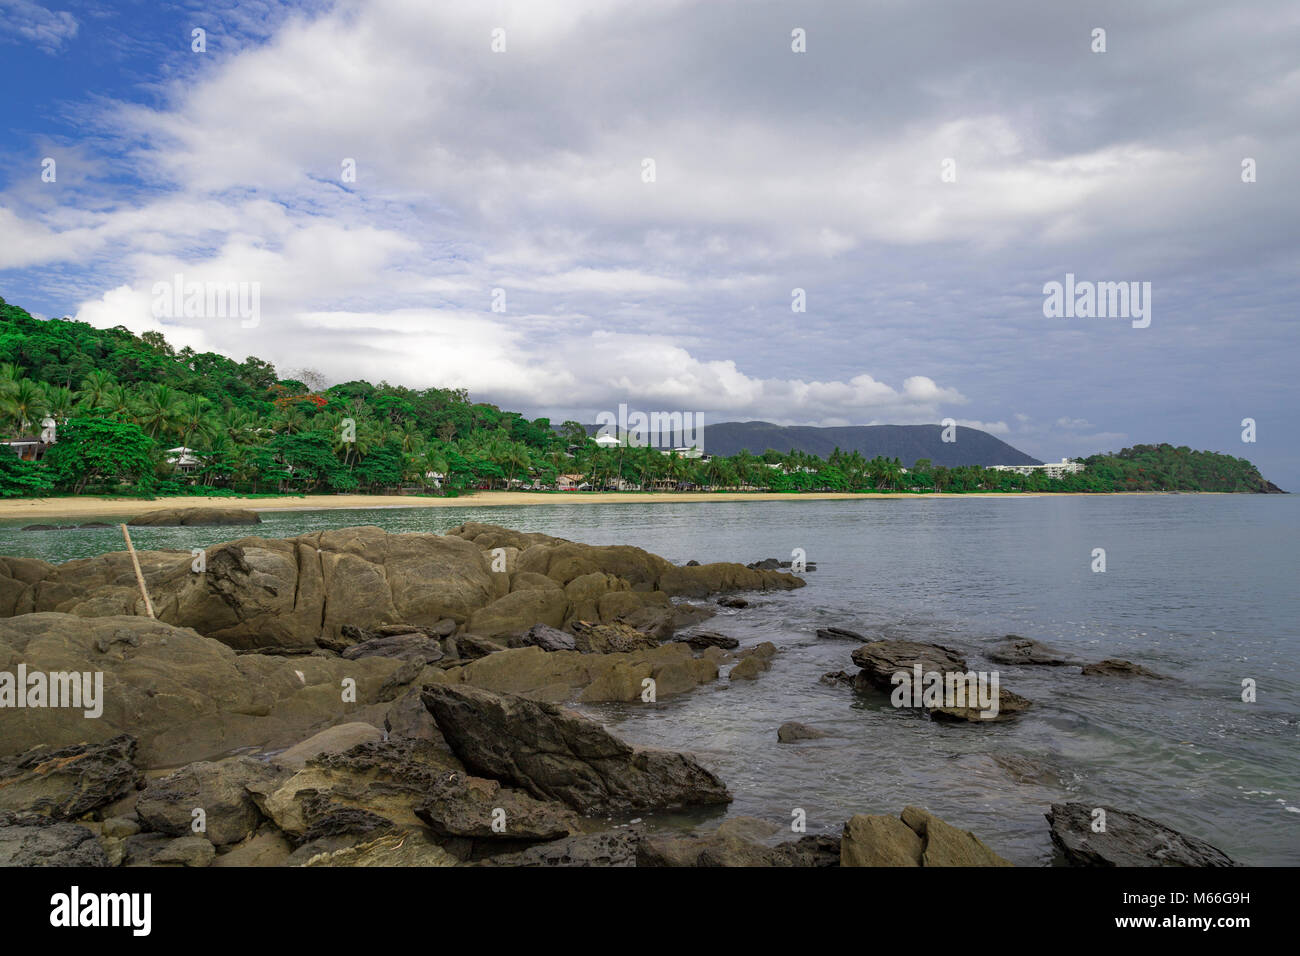 Just north of Cairns is Trinity Beach in far North Queensland Australia. Beautiful view of the area with rocks in the foreground. Stock Photo